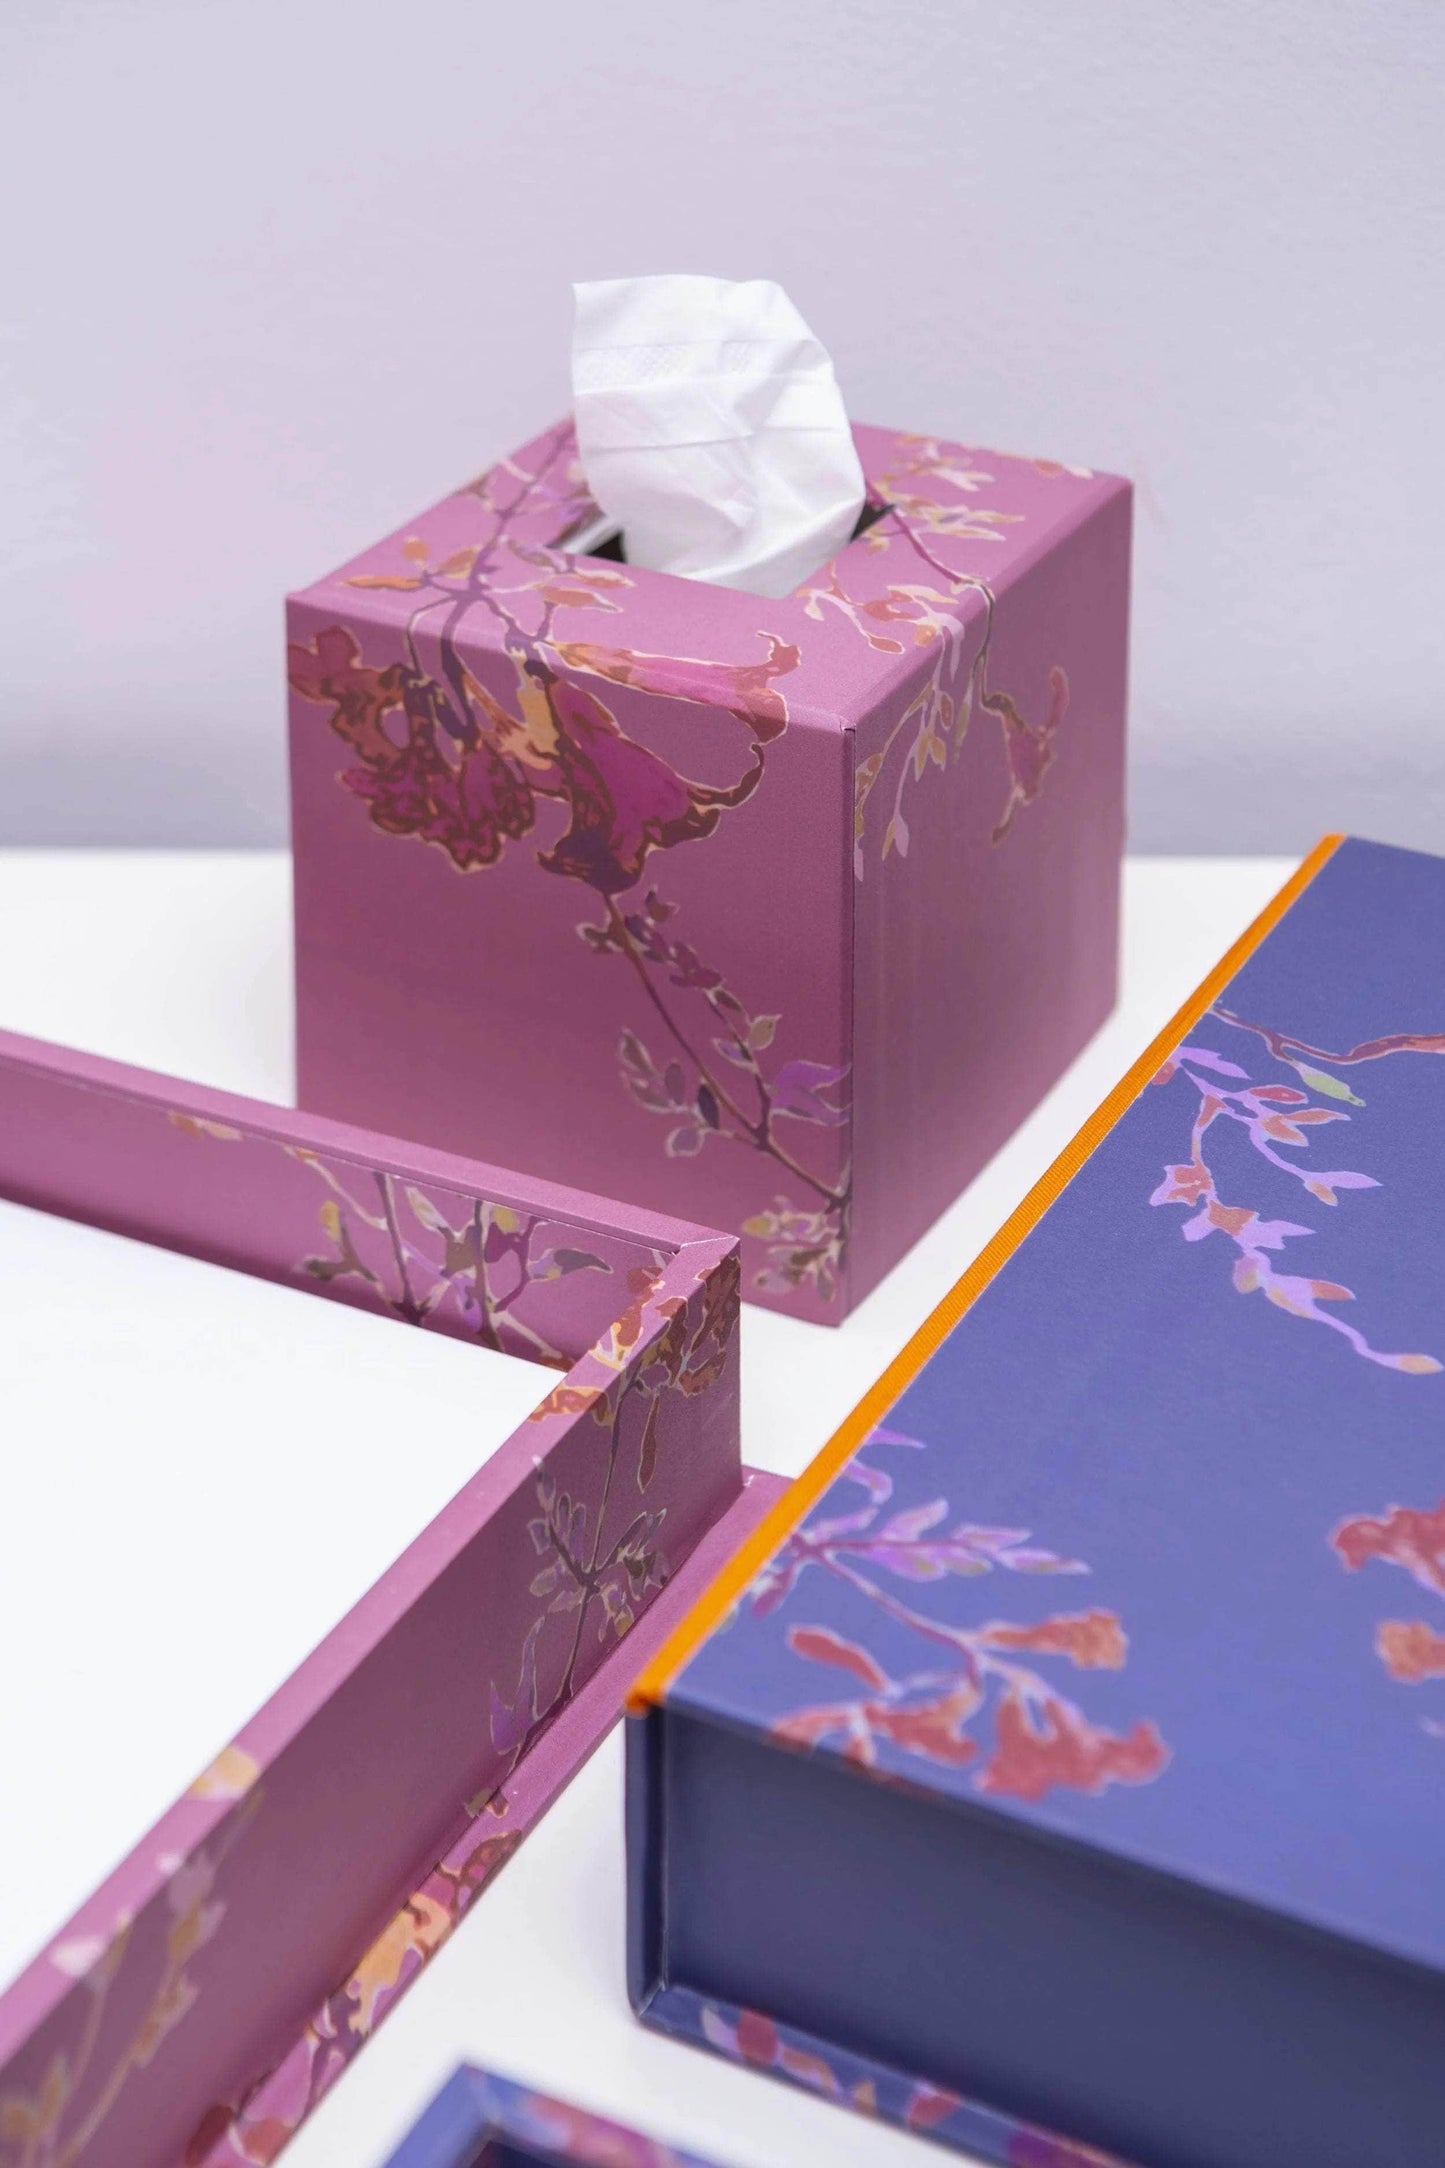 Load image into Gallery viewer, Didi Mara Pink Tissue Box Cover
